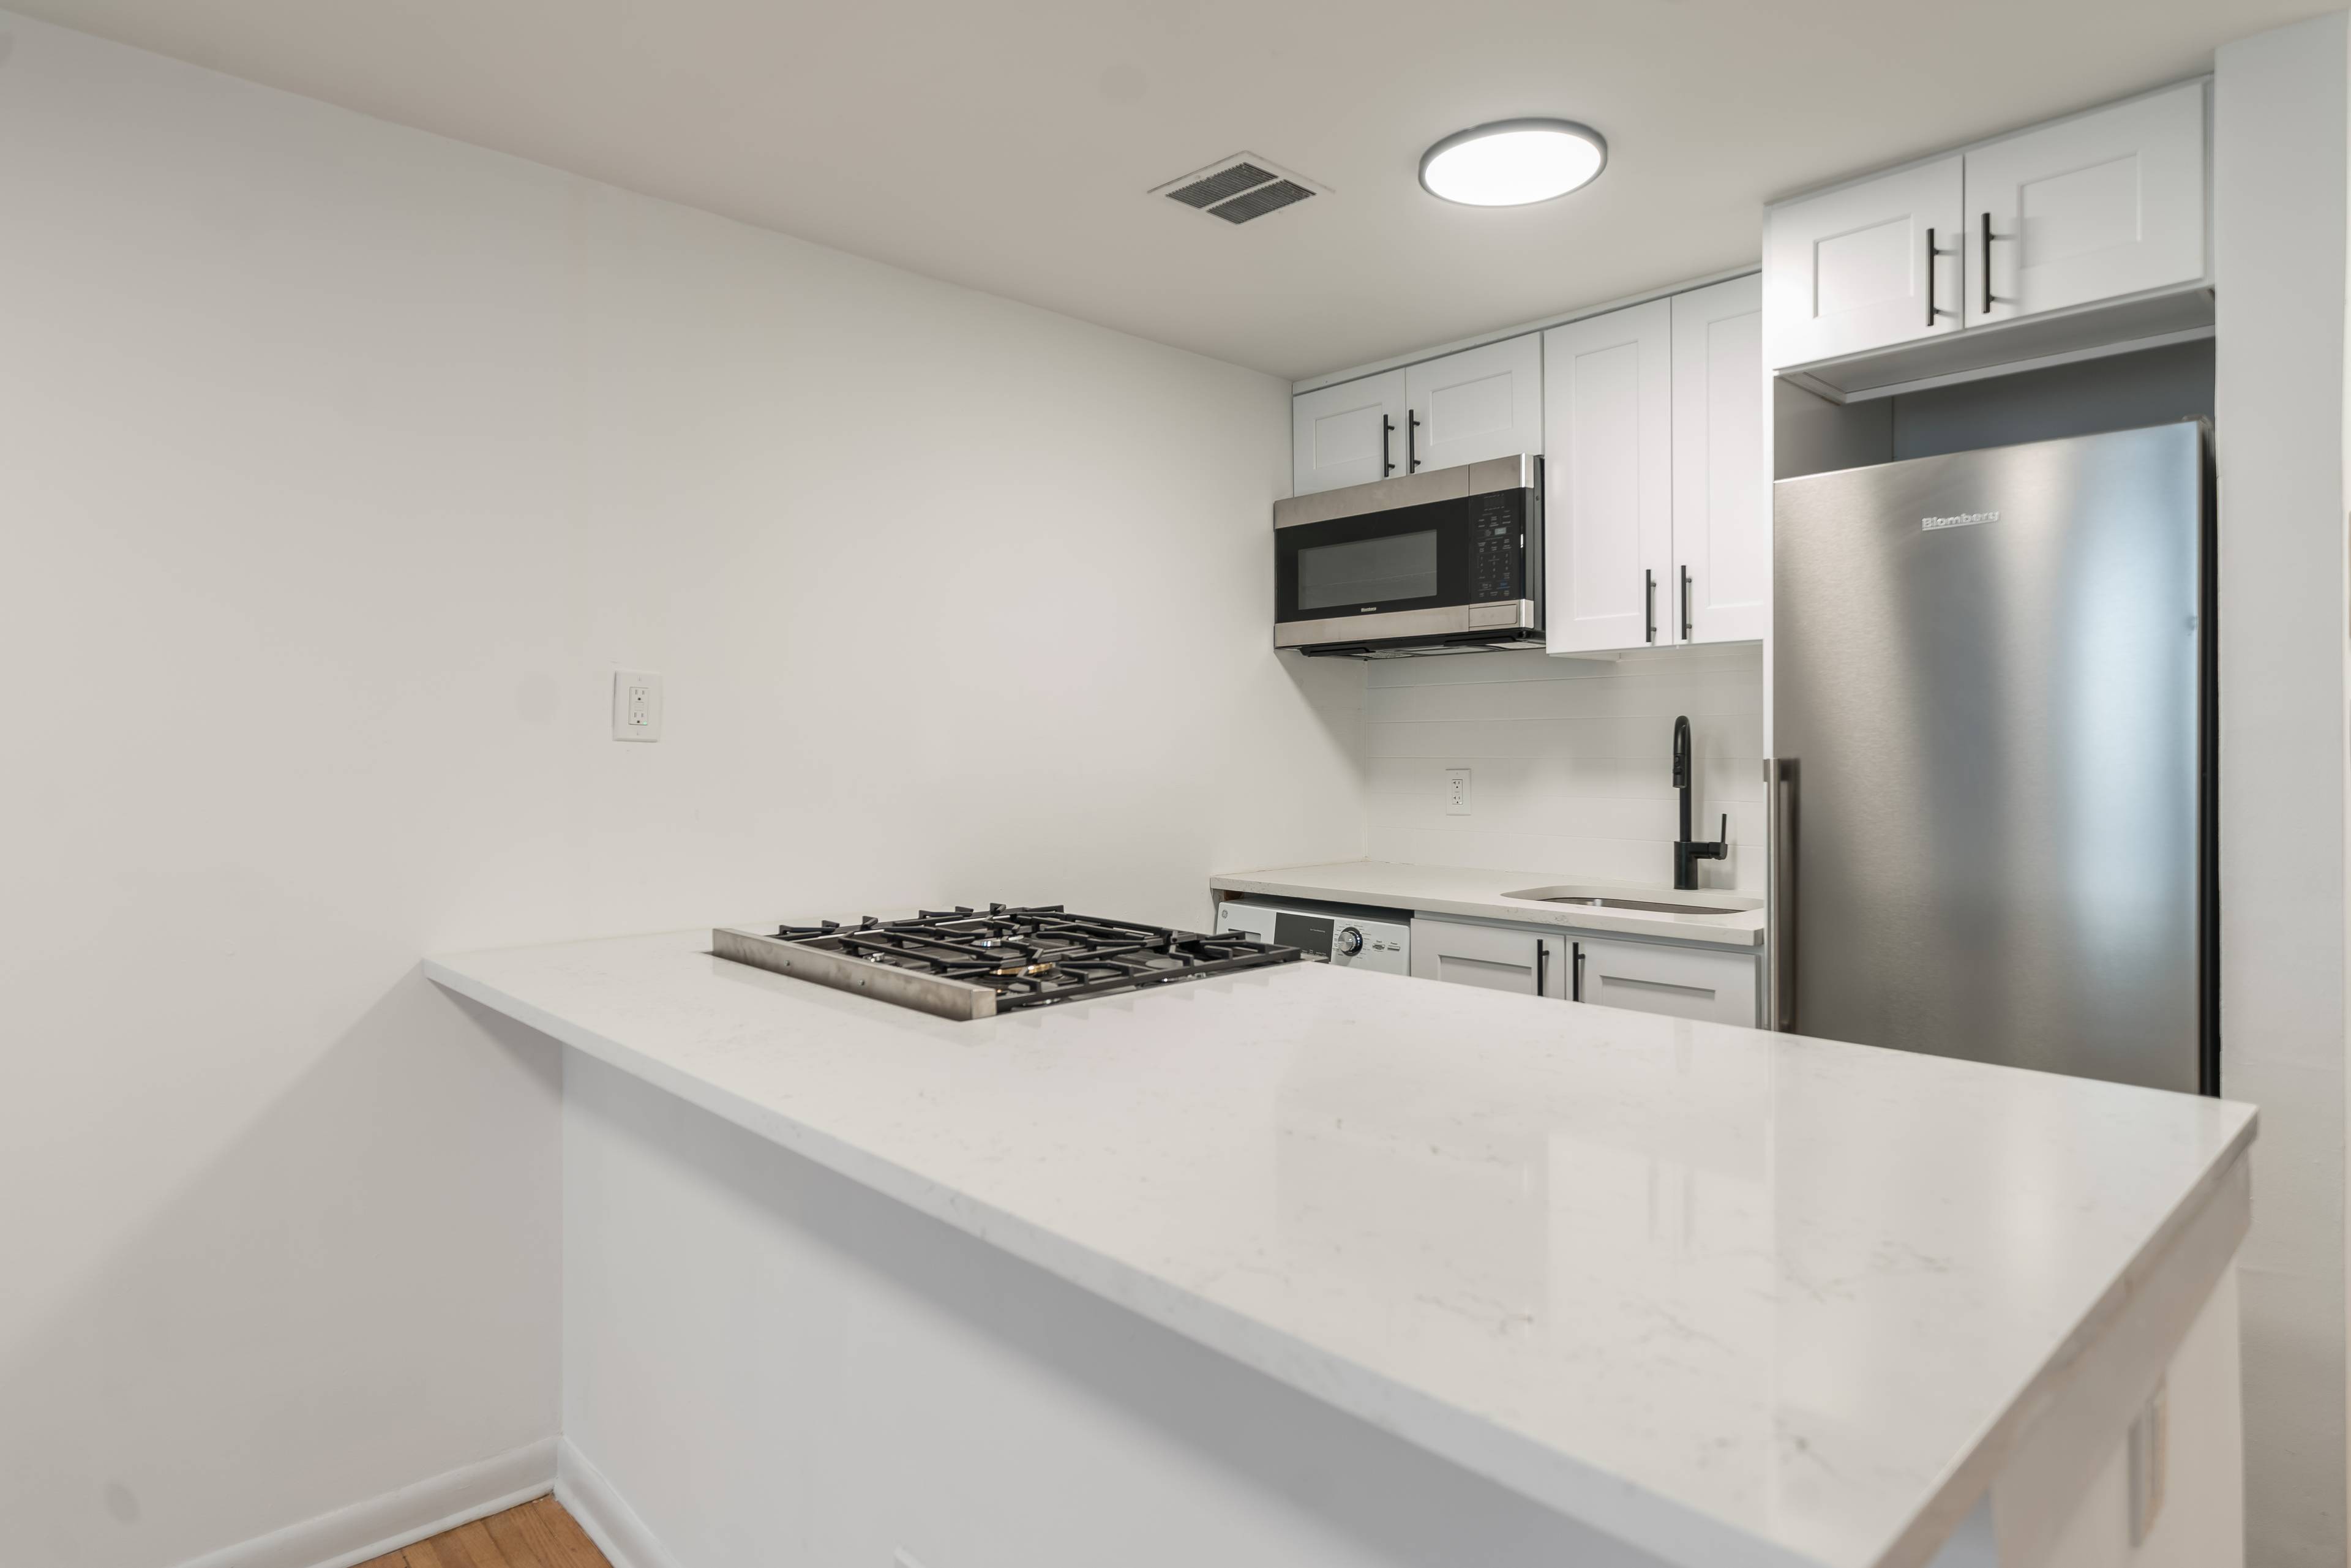 2 Bedroom 1 bath Uptown Hoboken-Central A/C-  Laundry in Unit!